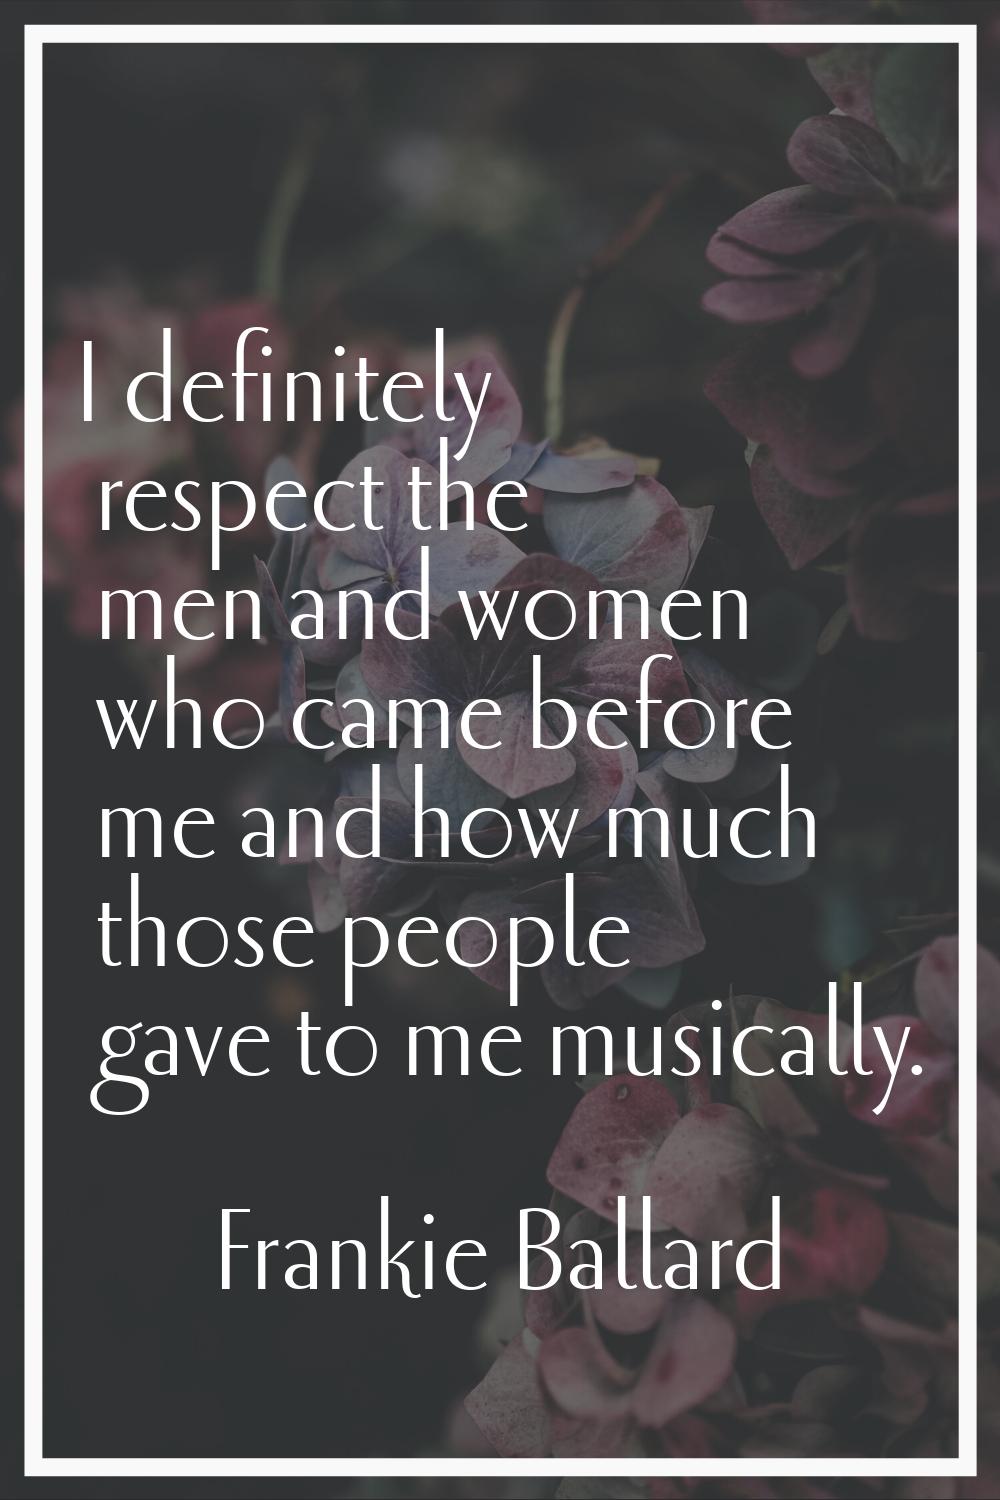 I definitely respect the men and women who came before me and how much those people gave to me musi